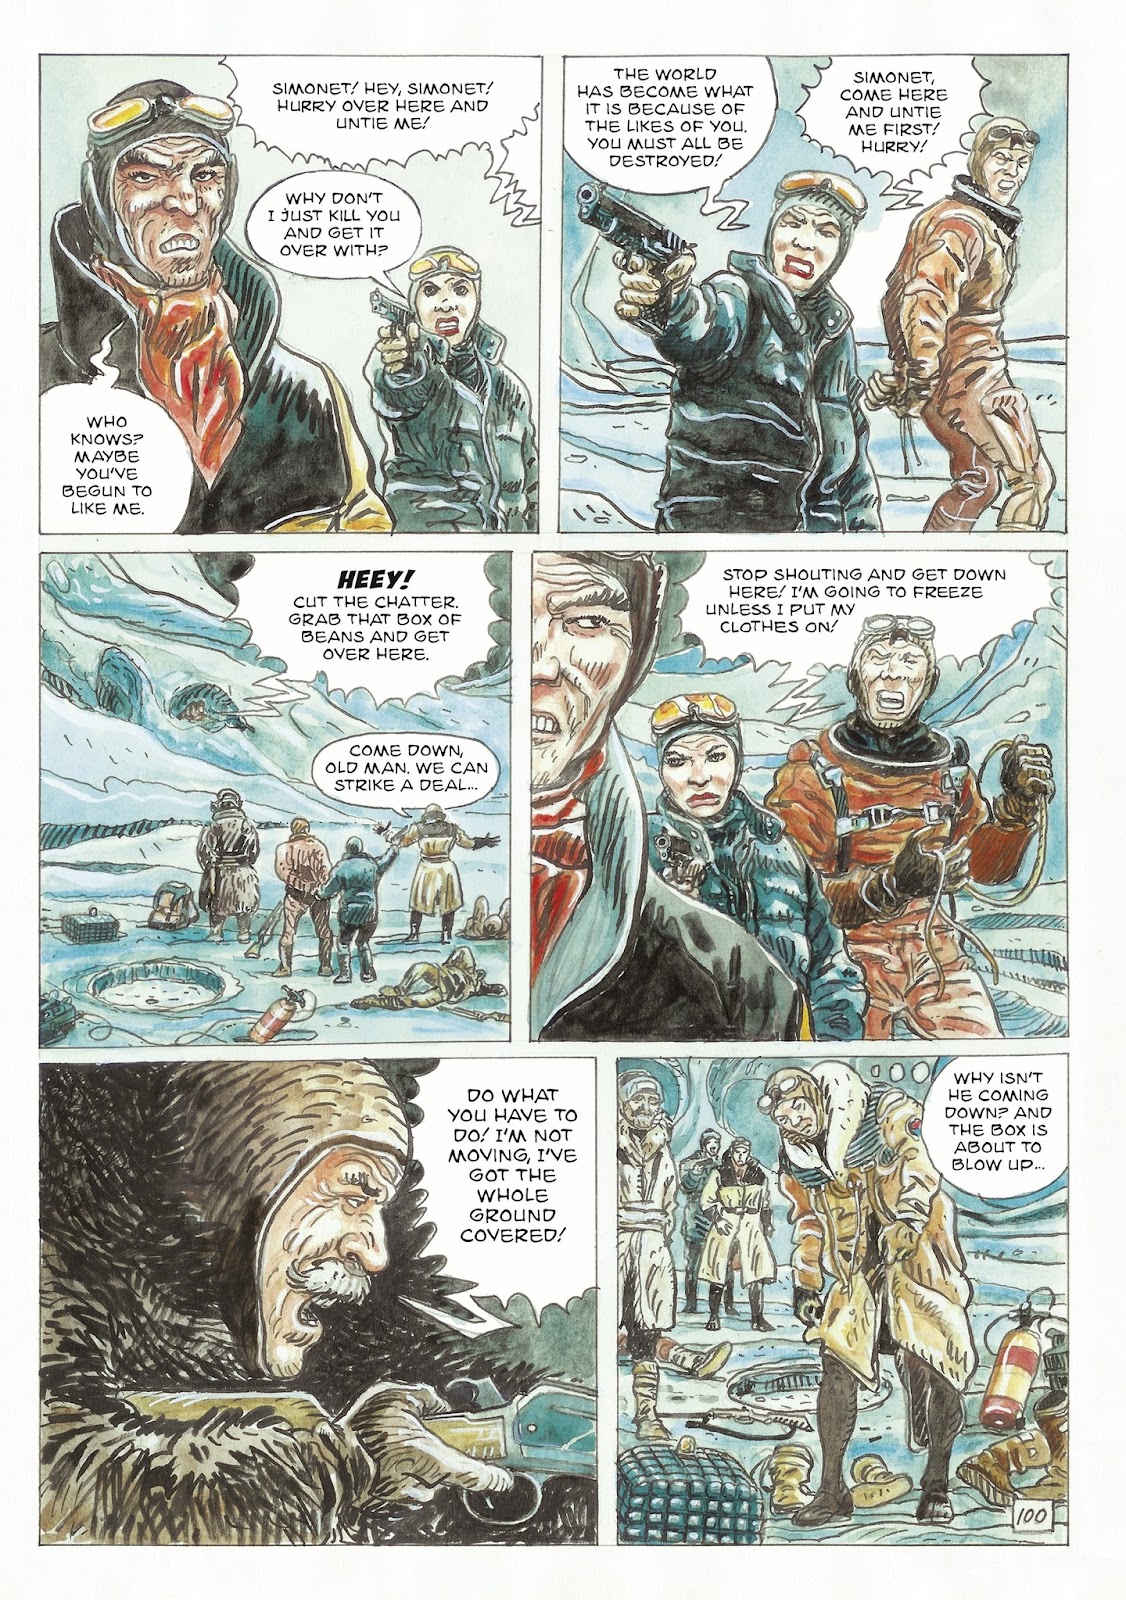 The Man With the Bear issue 2 - Page 46